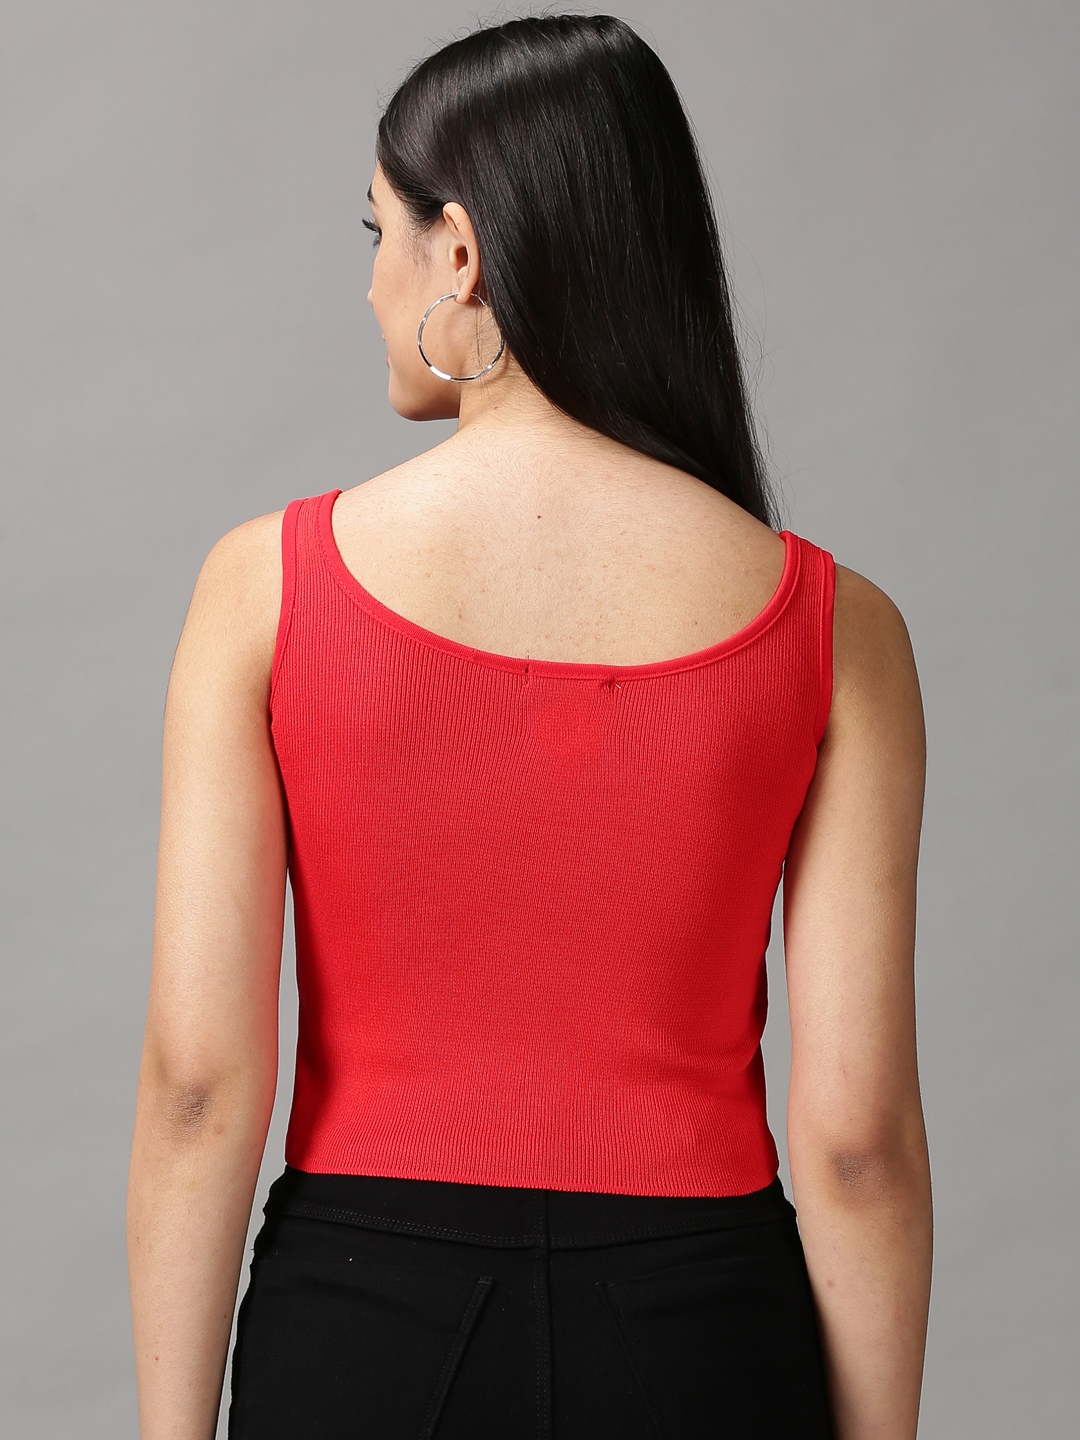 Women's Red Polycotton Solid Tops